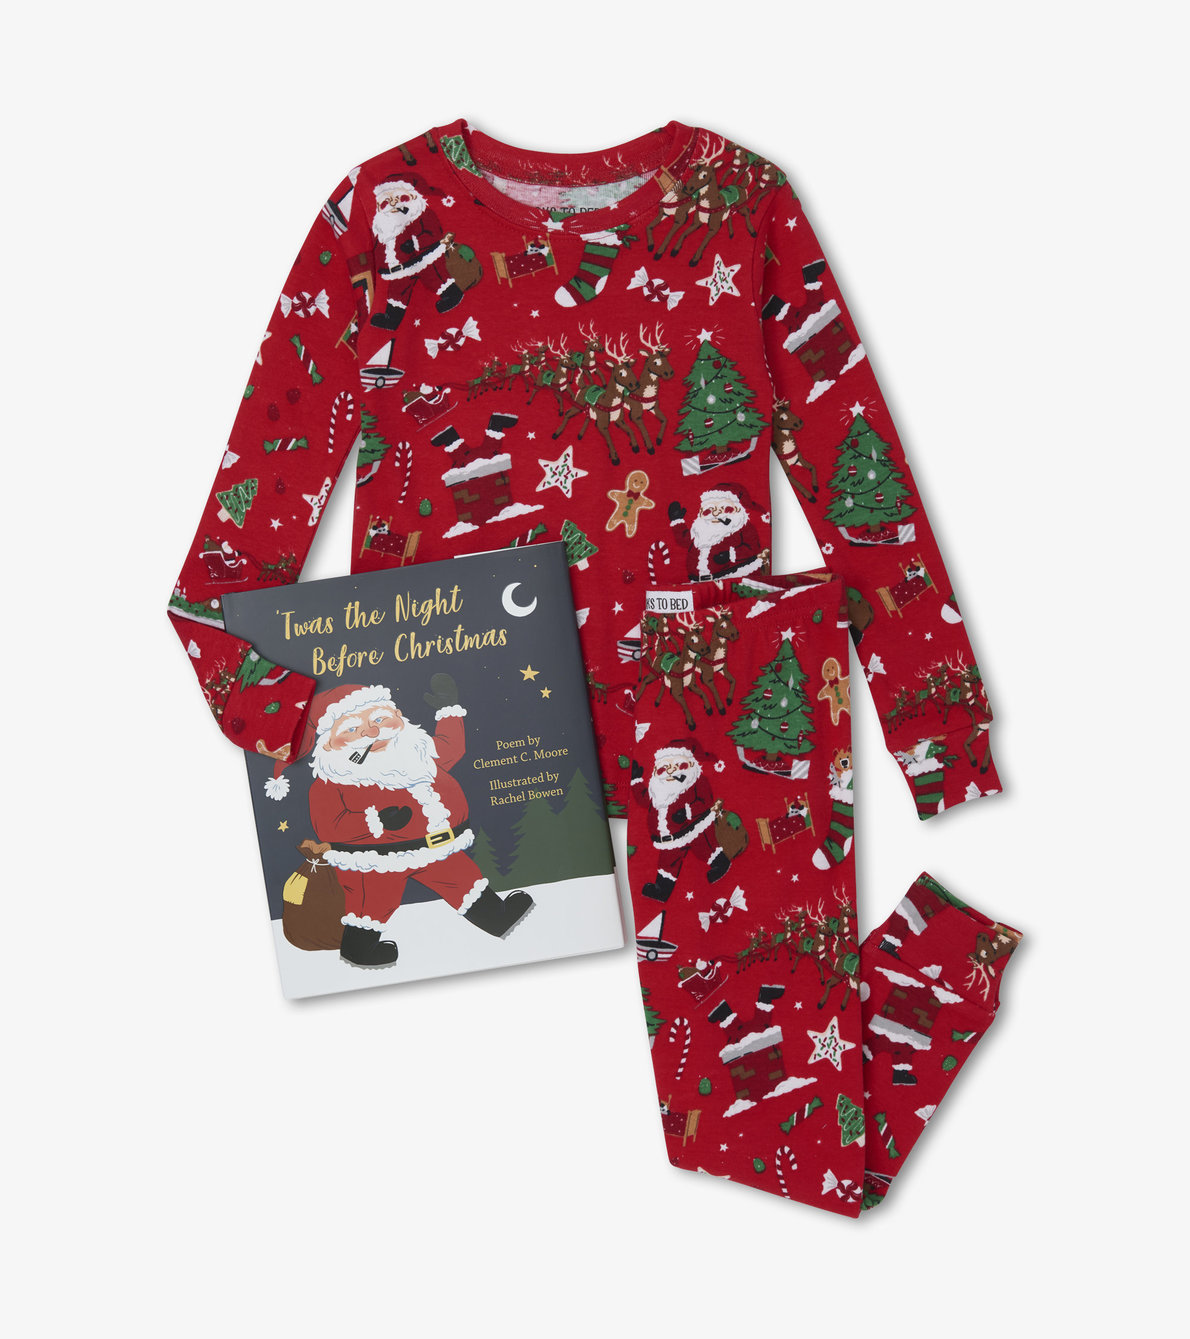 View larger image of Twas The Night Before Christmas Book and Pajama Set